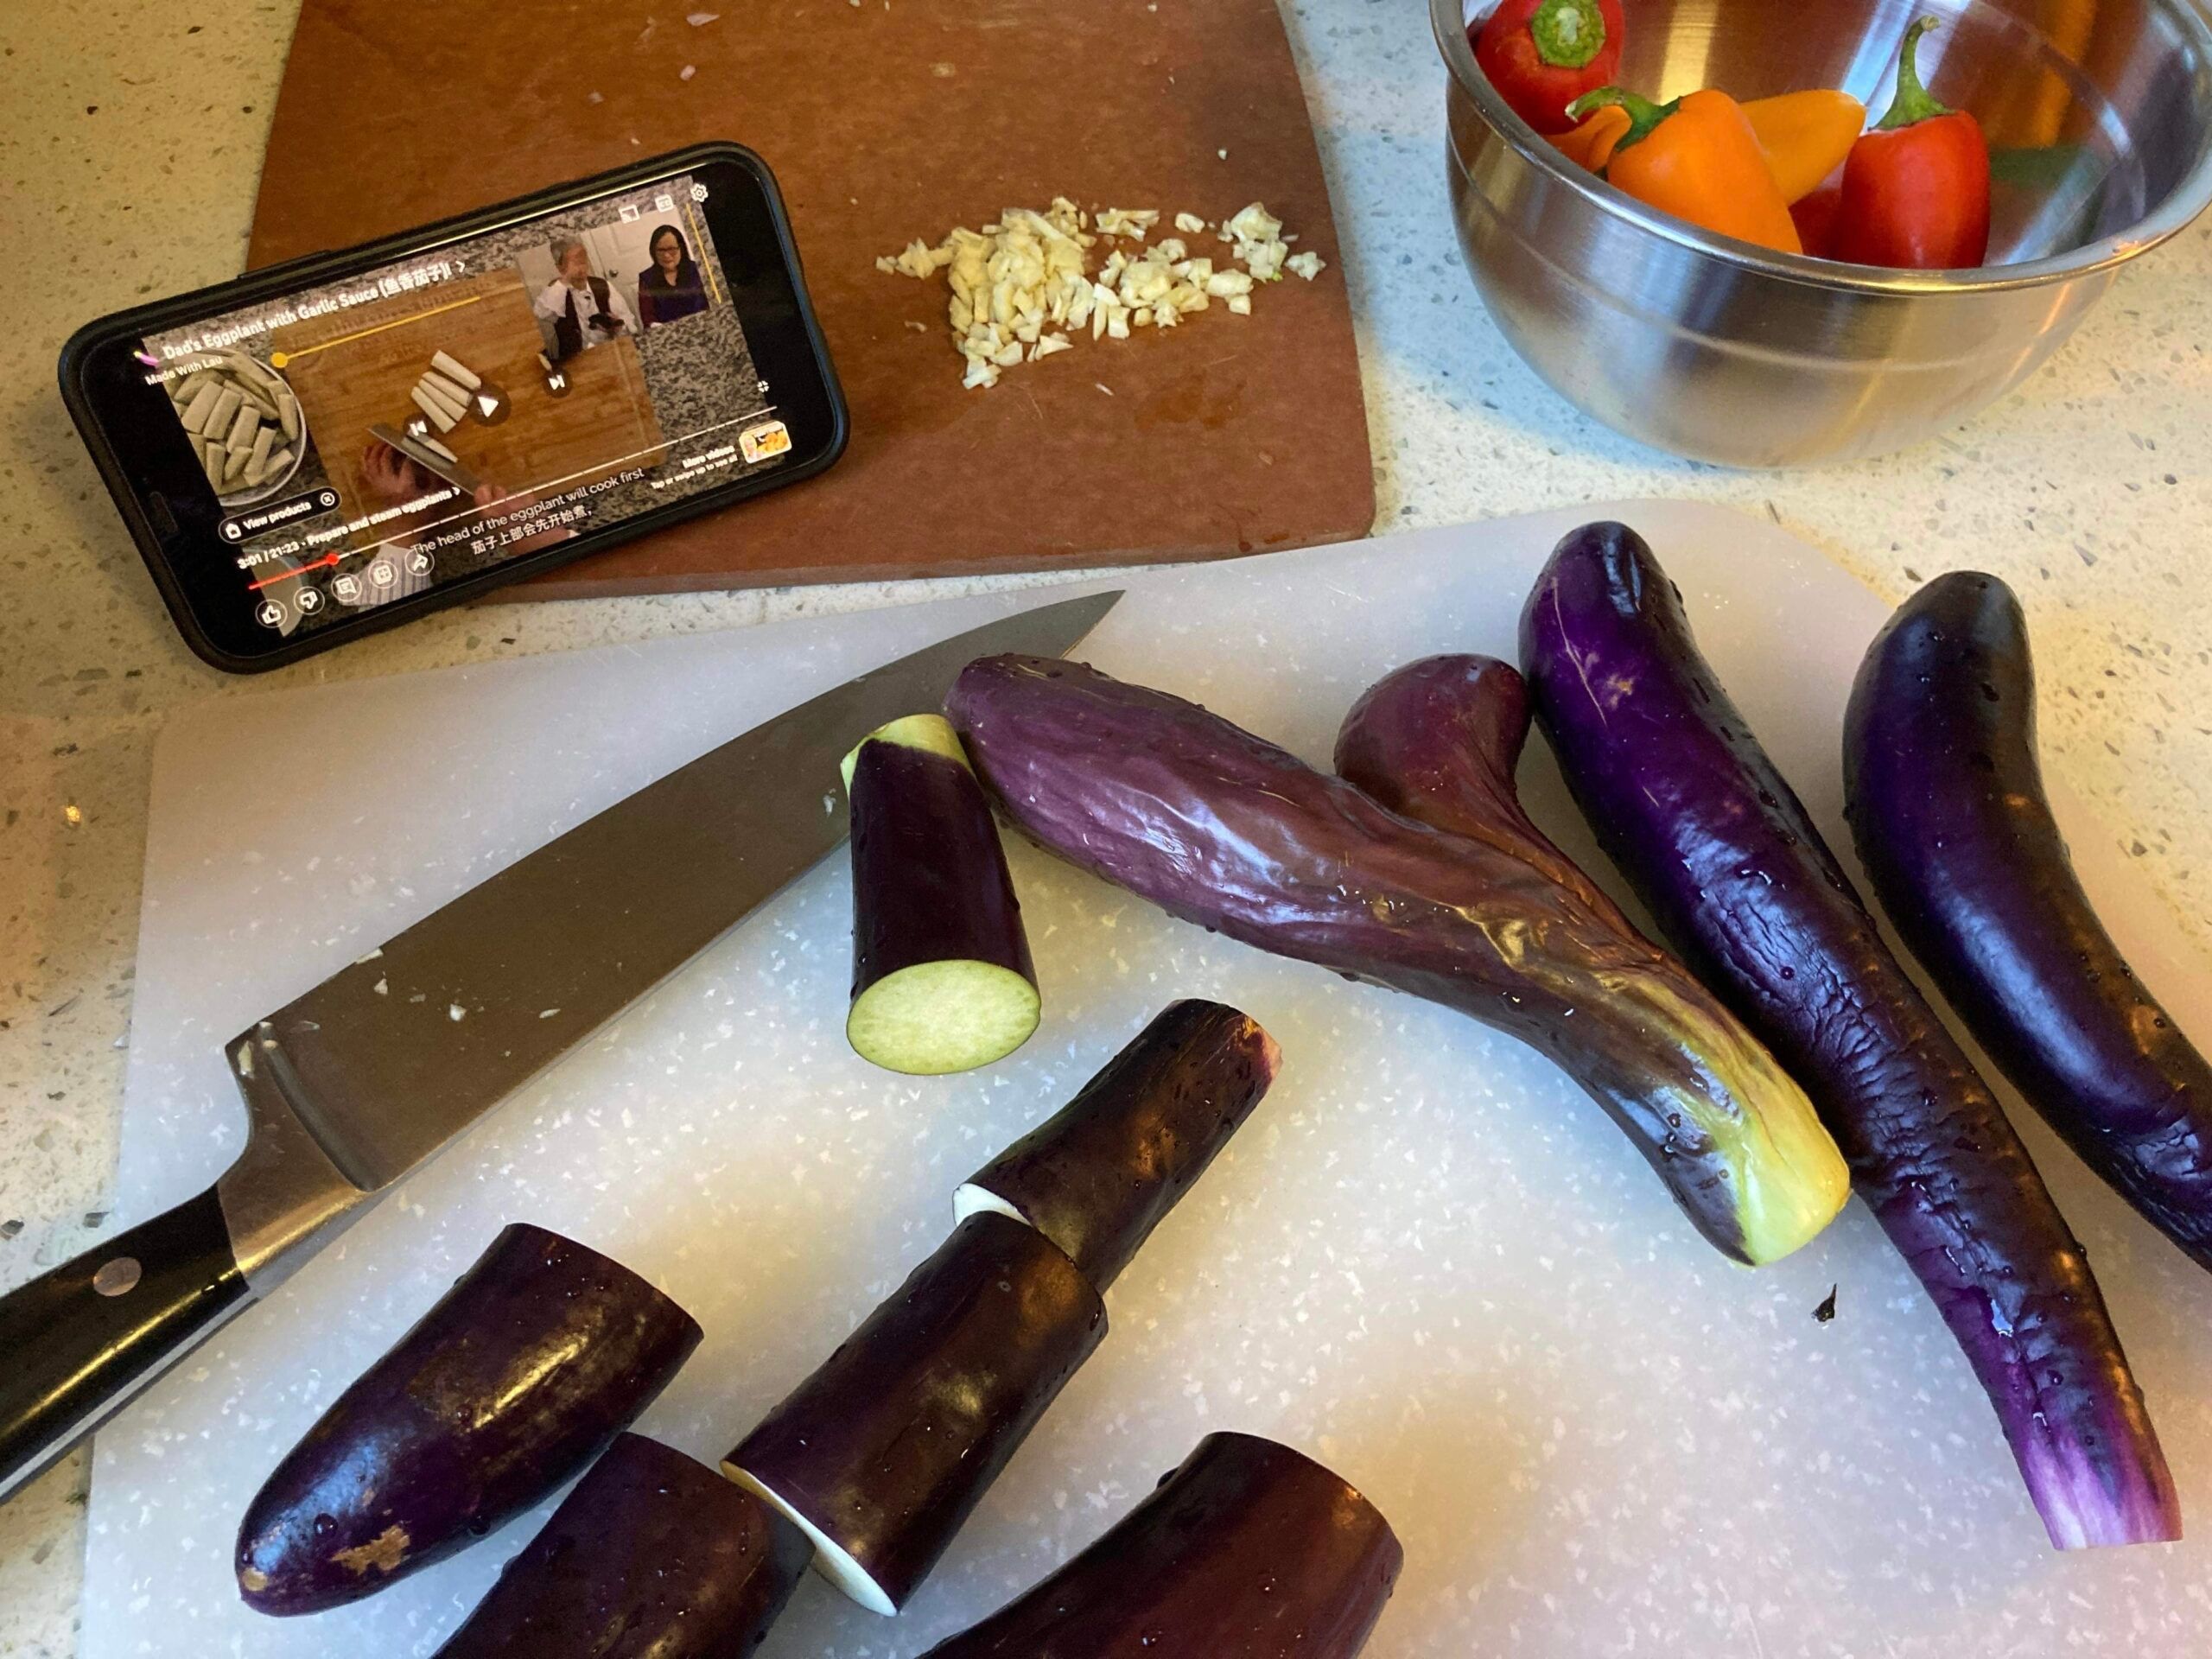 Photo of a web-based cooking class and recipe in progress